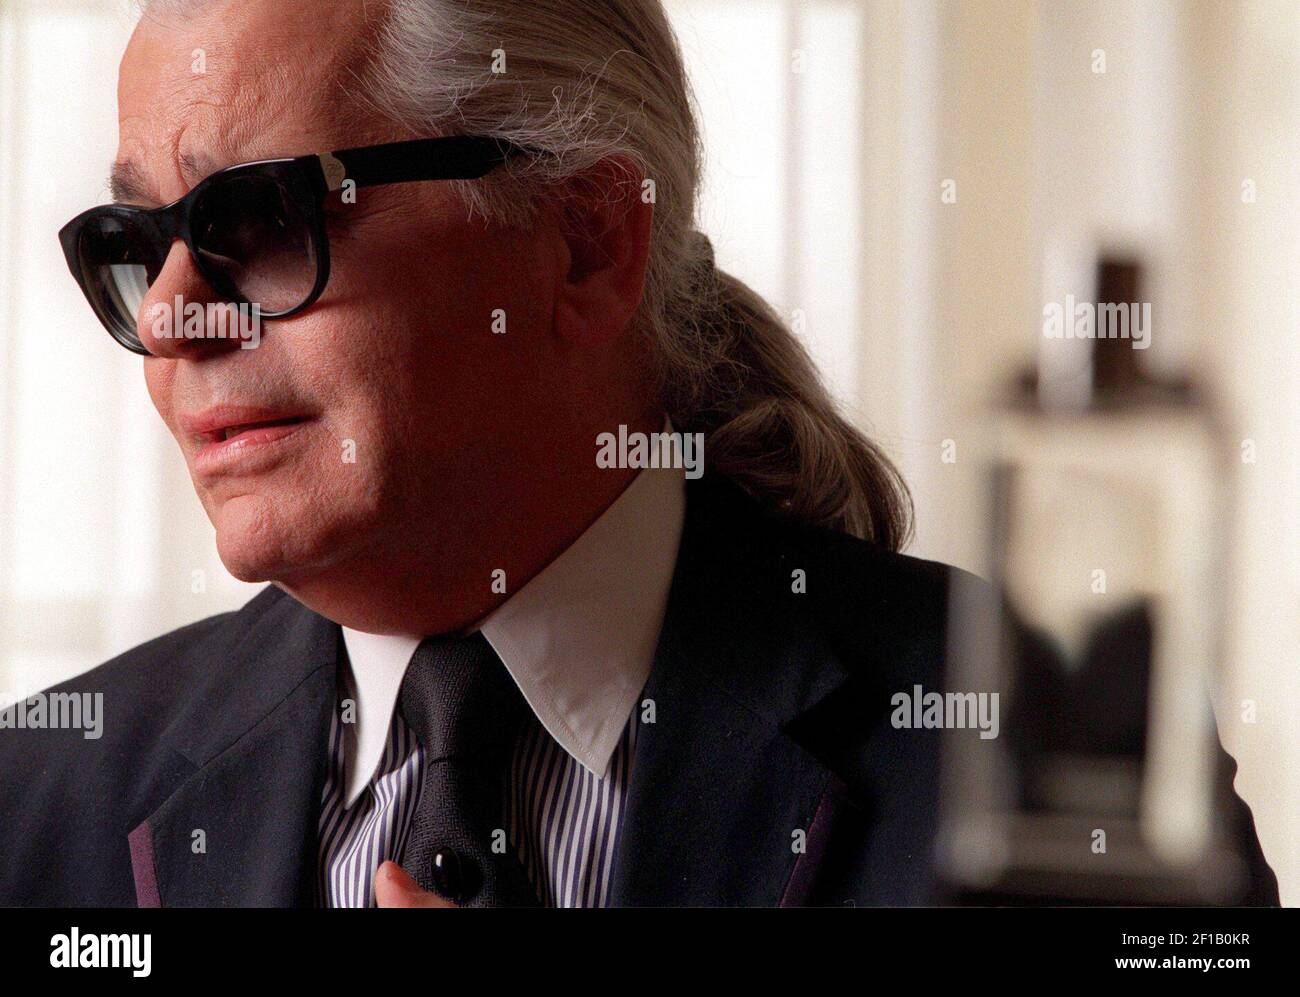 KRT FASHION STORY SLUGGED: KARL KRT PHOTOGRAPH BY JOE STEFANCHIK/DALLAS  MORNING NEWS (FORT WORTH OUT) Fashion legend Karl Lagerfeld in Dallas last  month to launch his new men's fragrance, Jako. At 60,